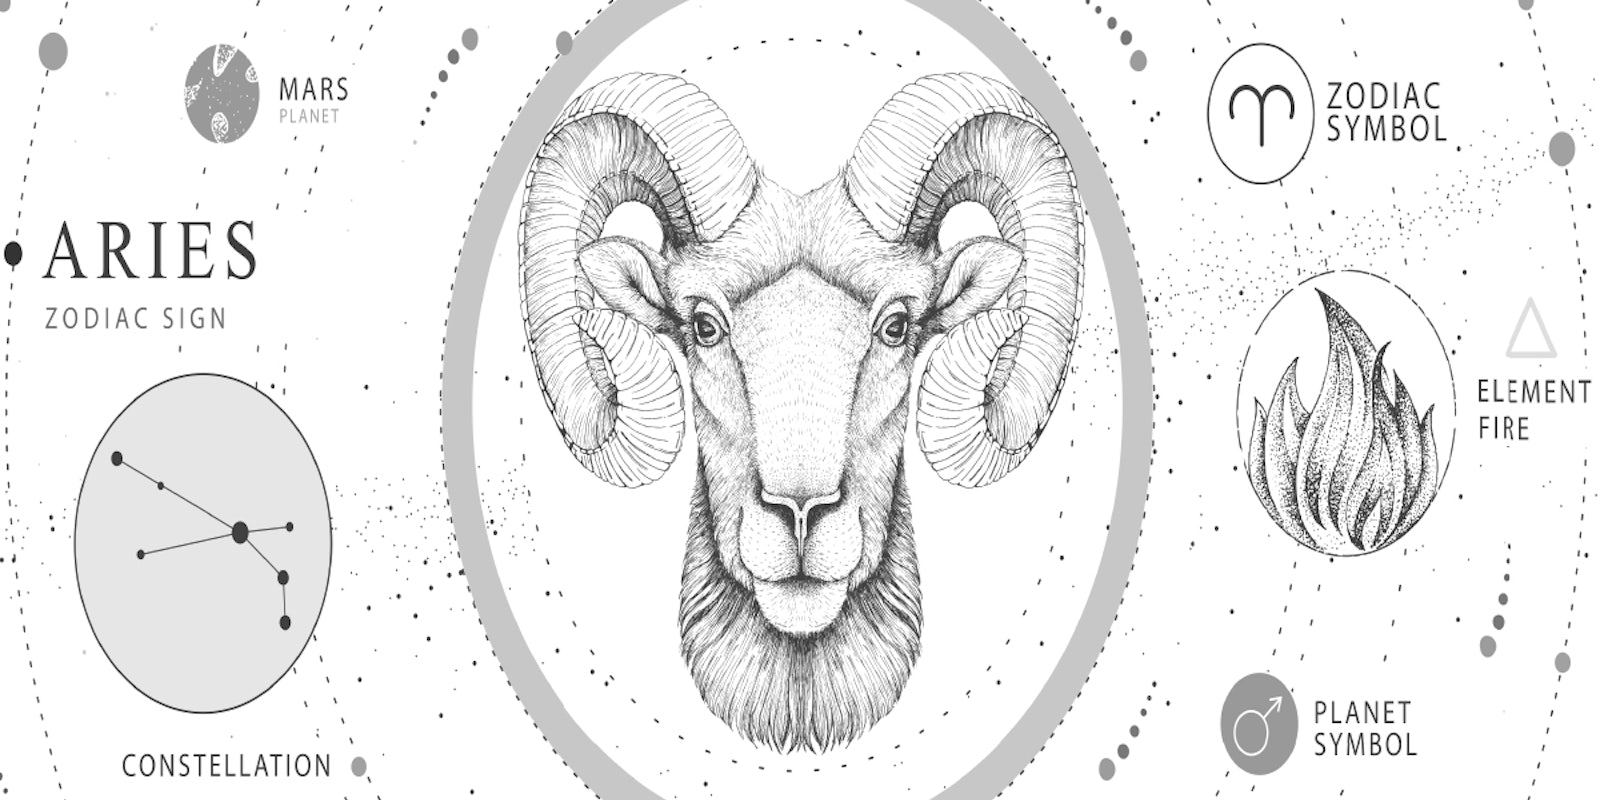 Aries in astrology: Expressed by the ram, mars, a fire sign. Image visualizes the ram, the aries constellation as well as the planet and zodiac symbols.